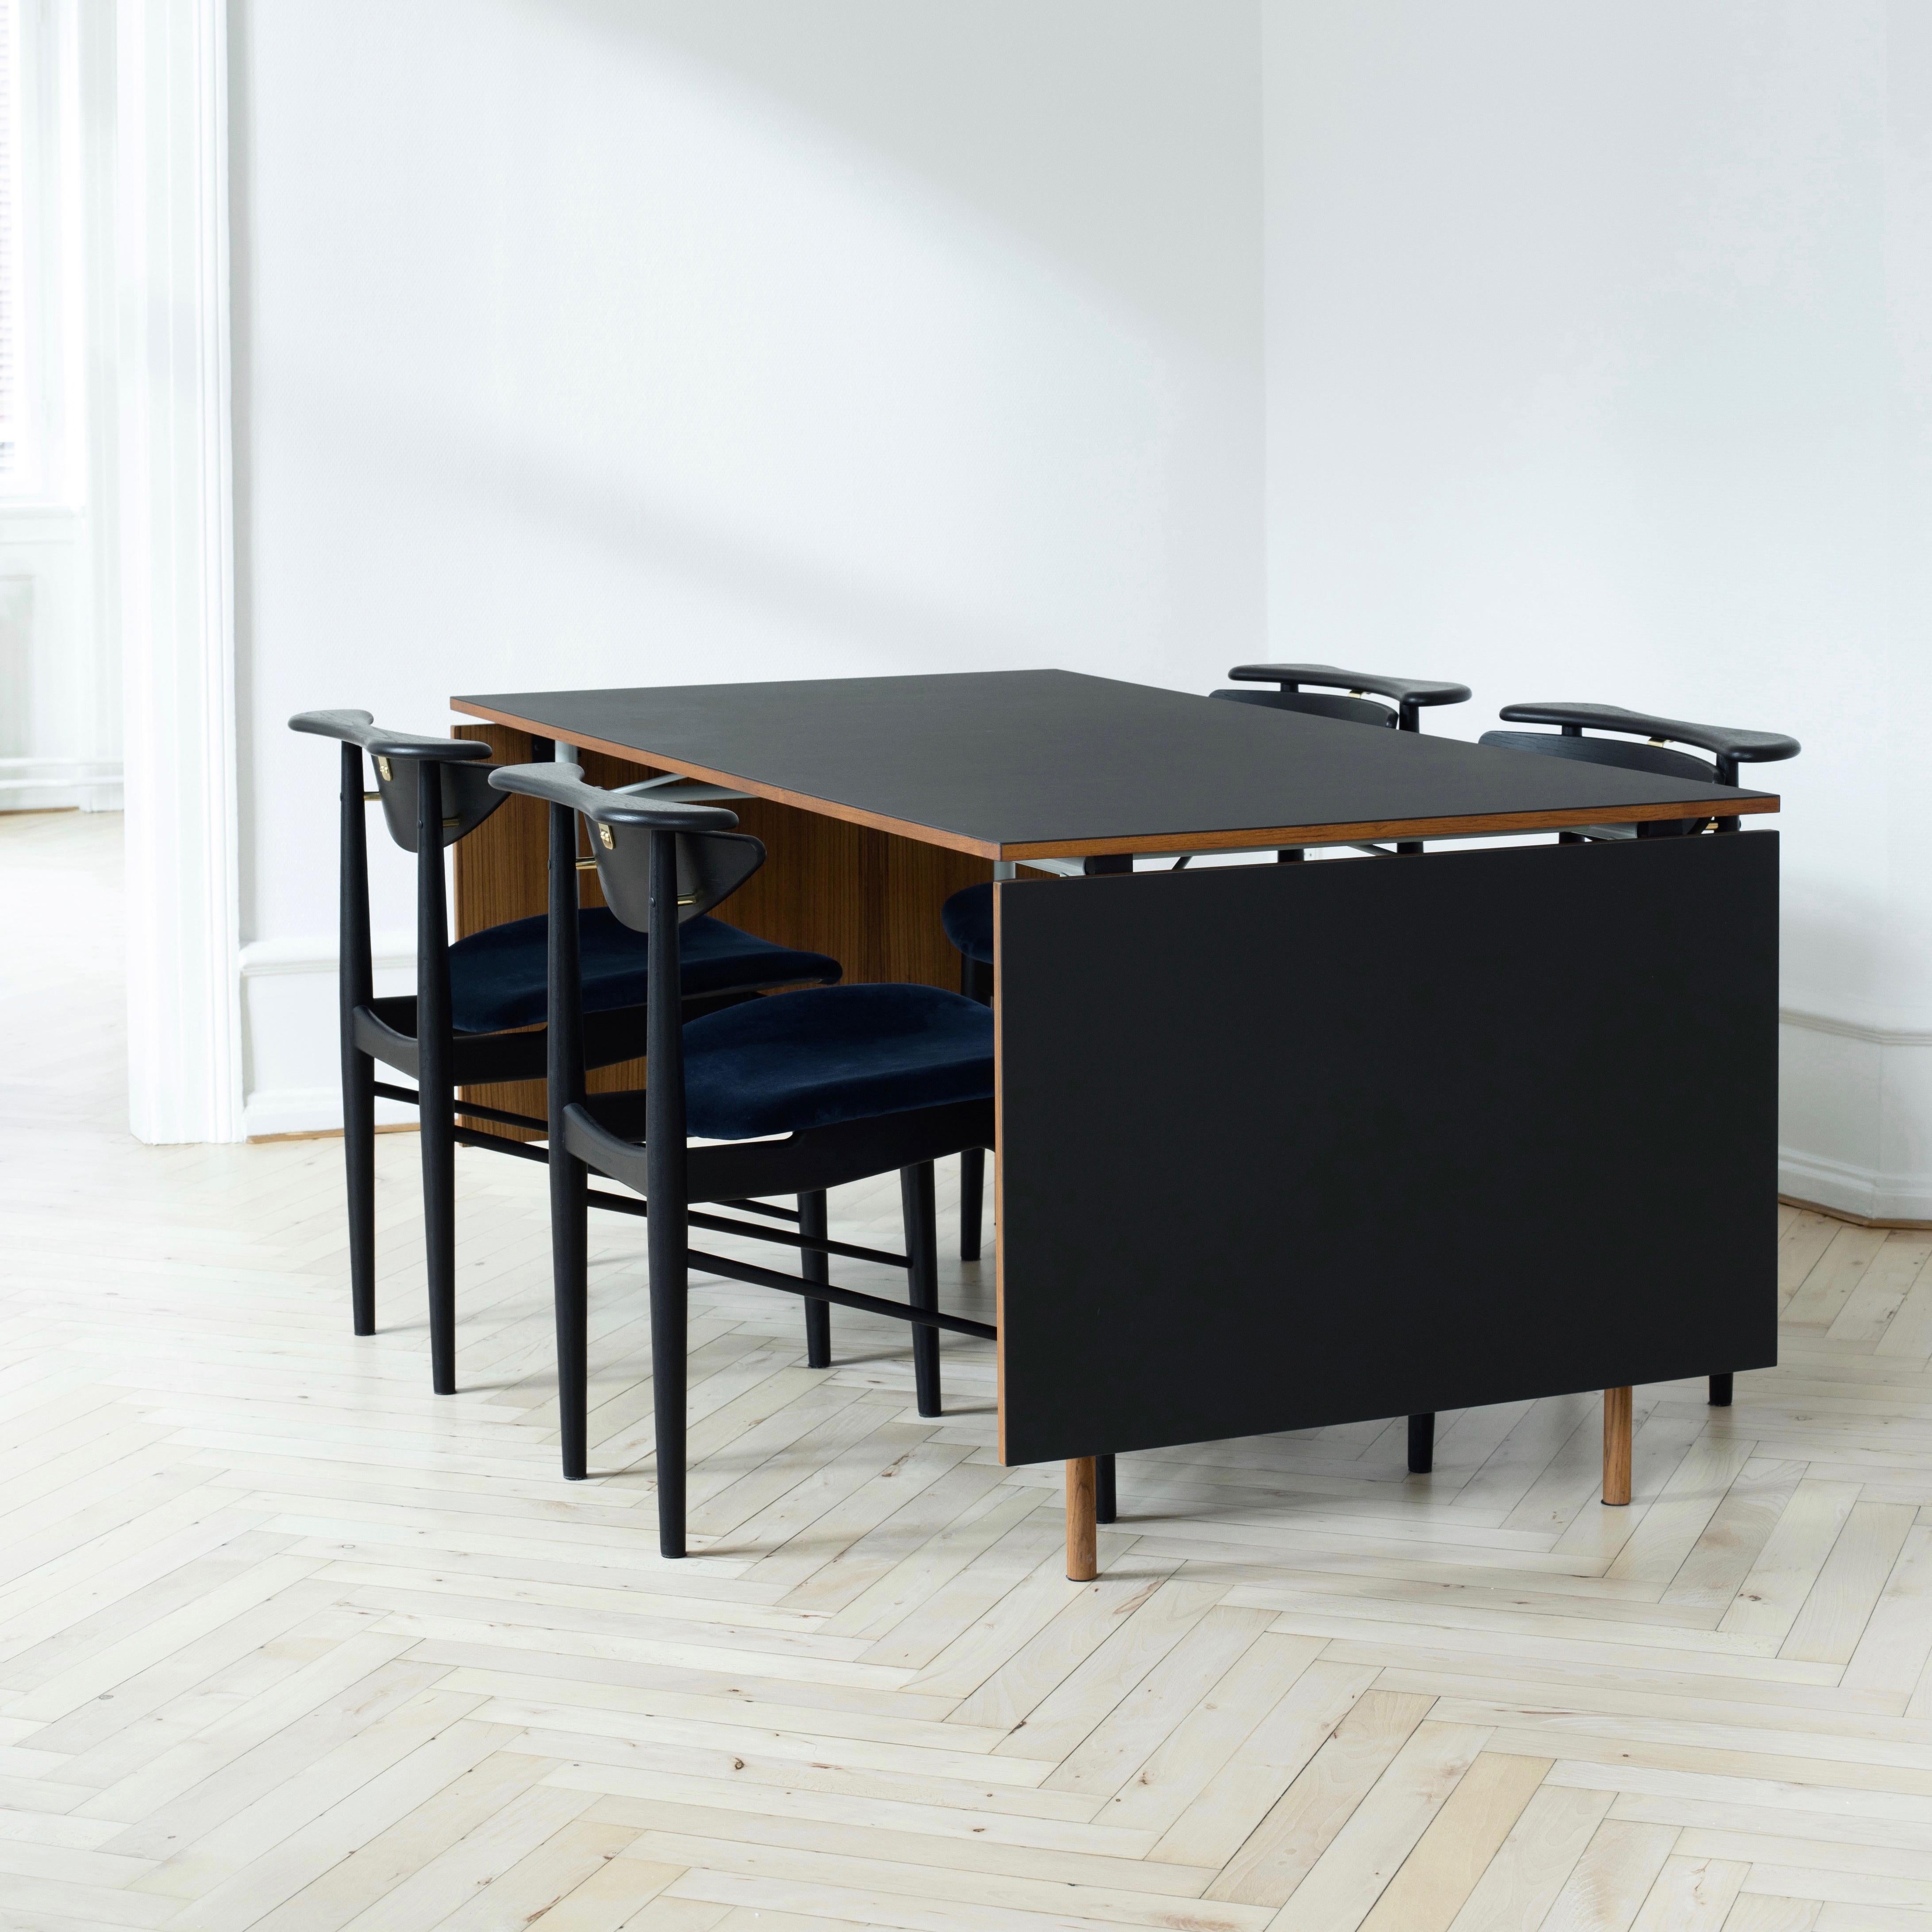 Finn Juhl Nyhavn Dining Table with Two Drop Leaves, Lino and Wood 3